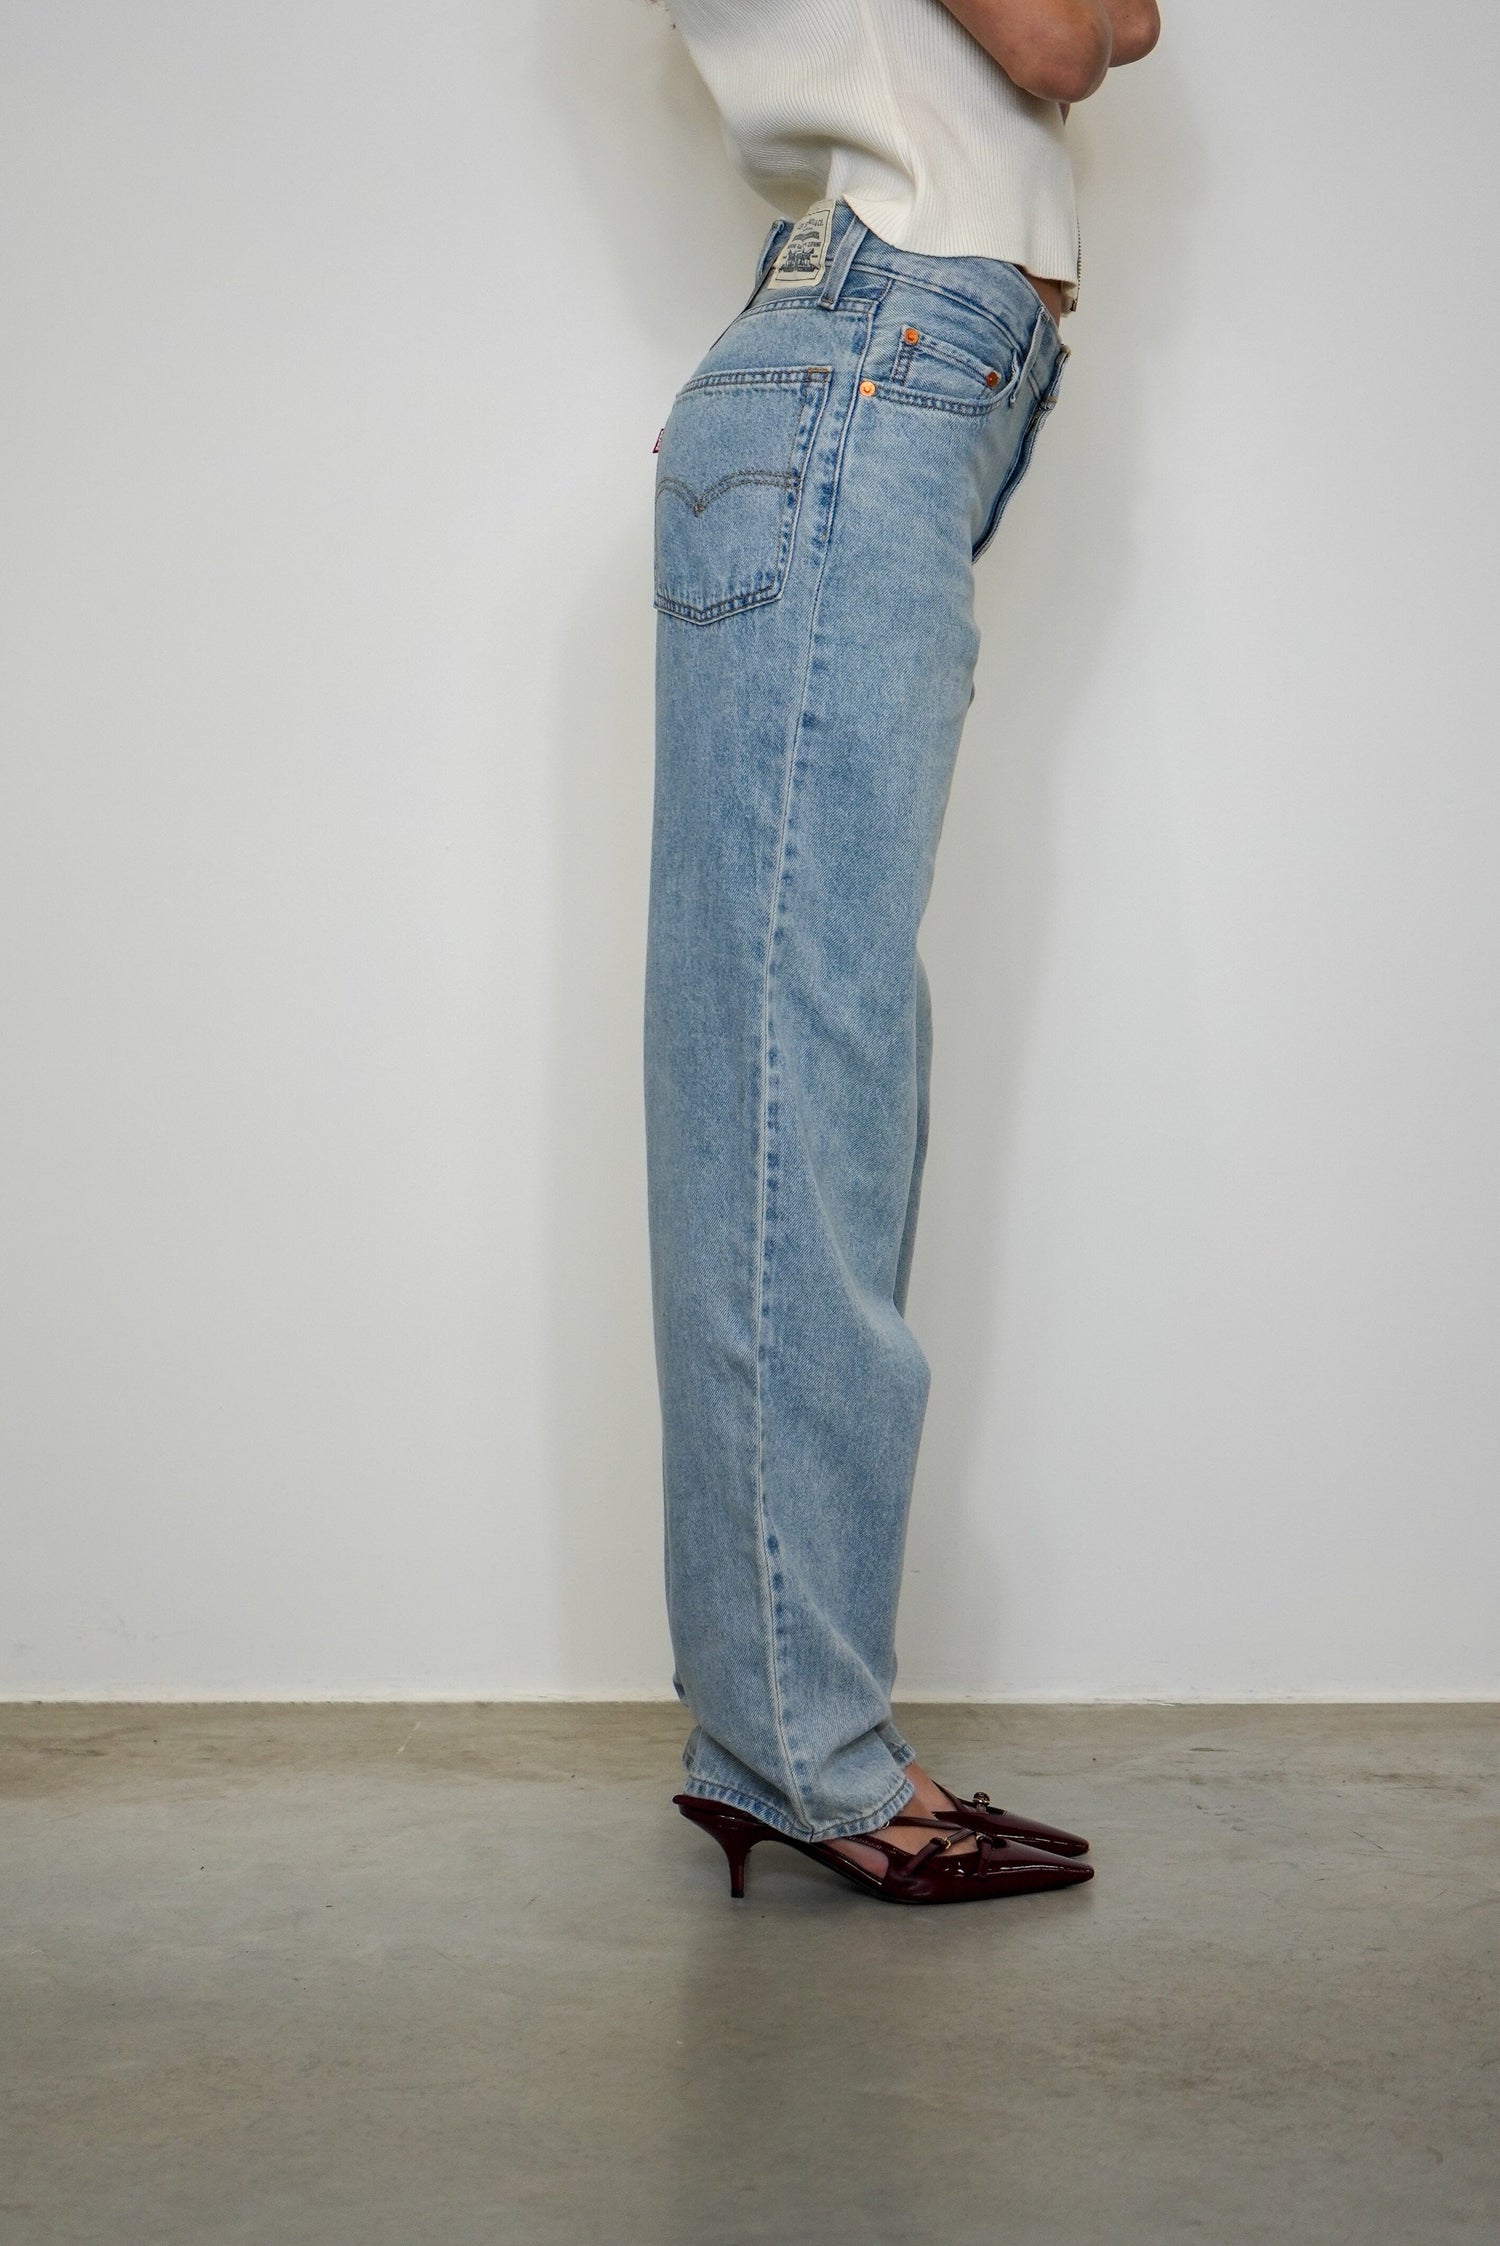 BAGGY DAD JEANS IN MAKE A DIFFERENCE JEANS LEVIS 